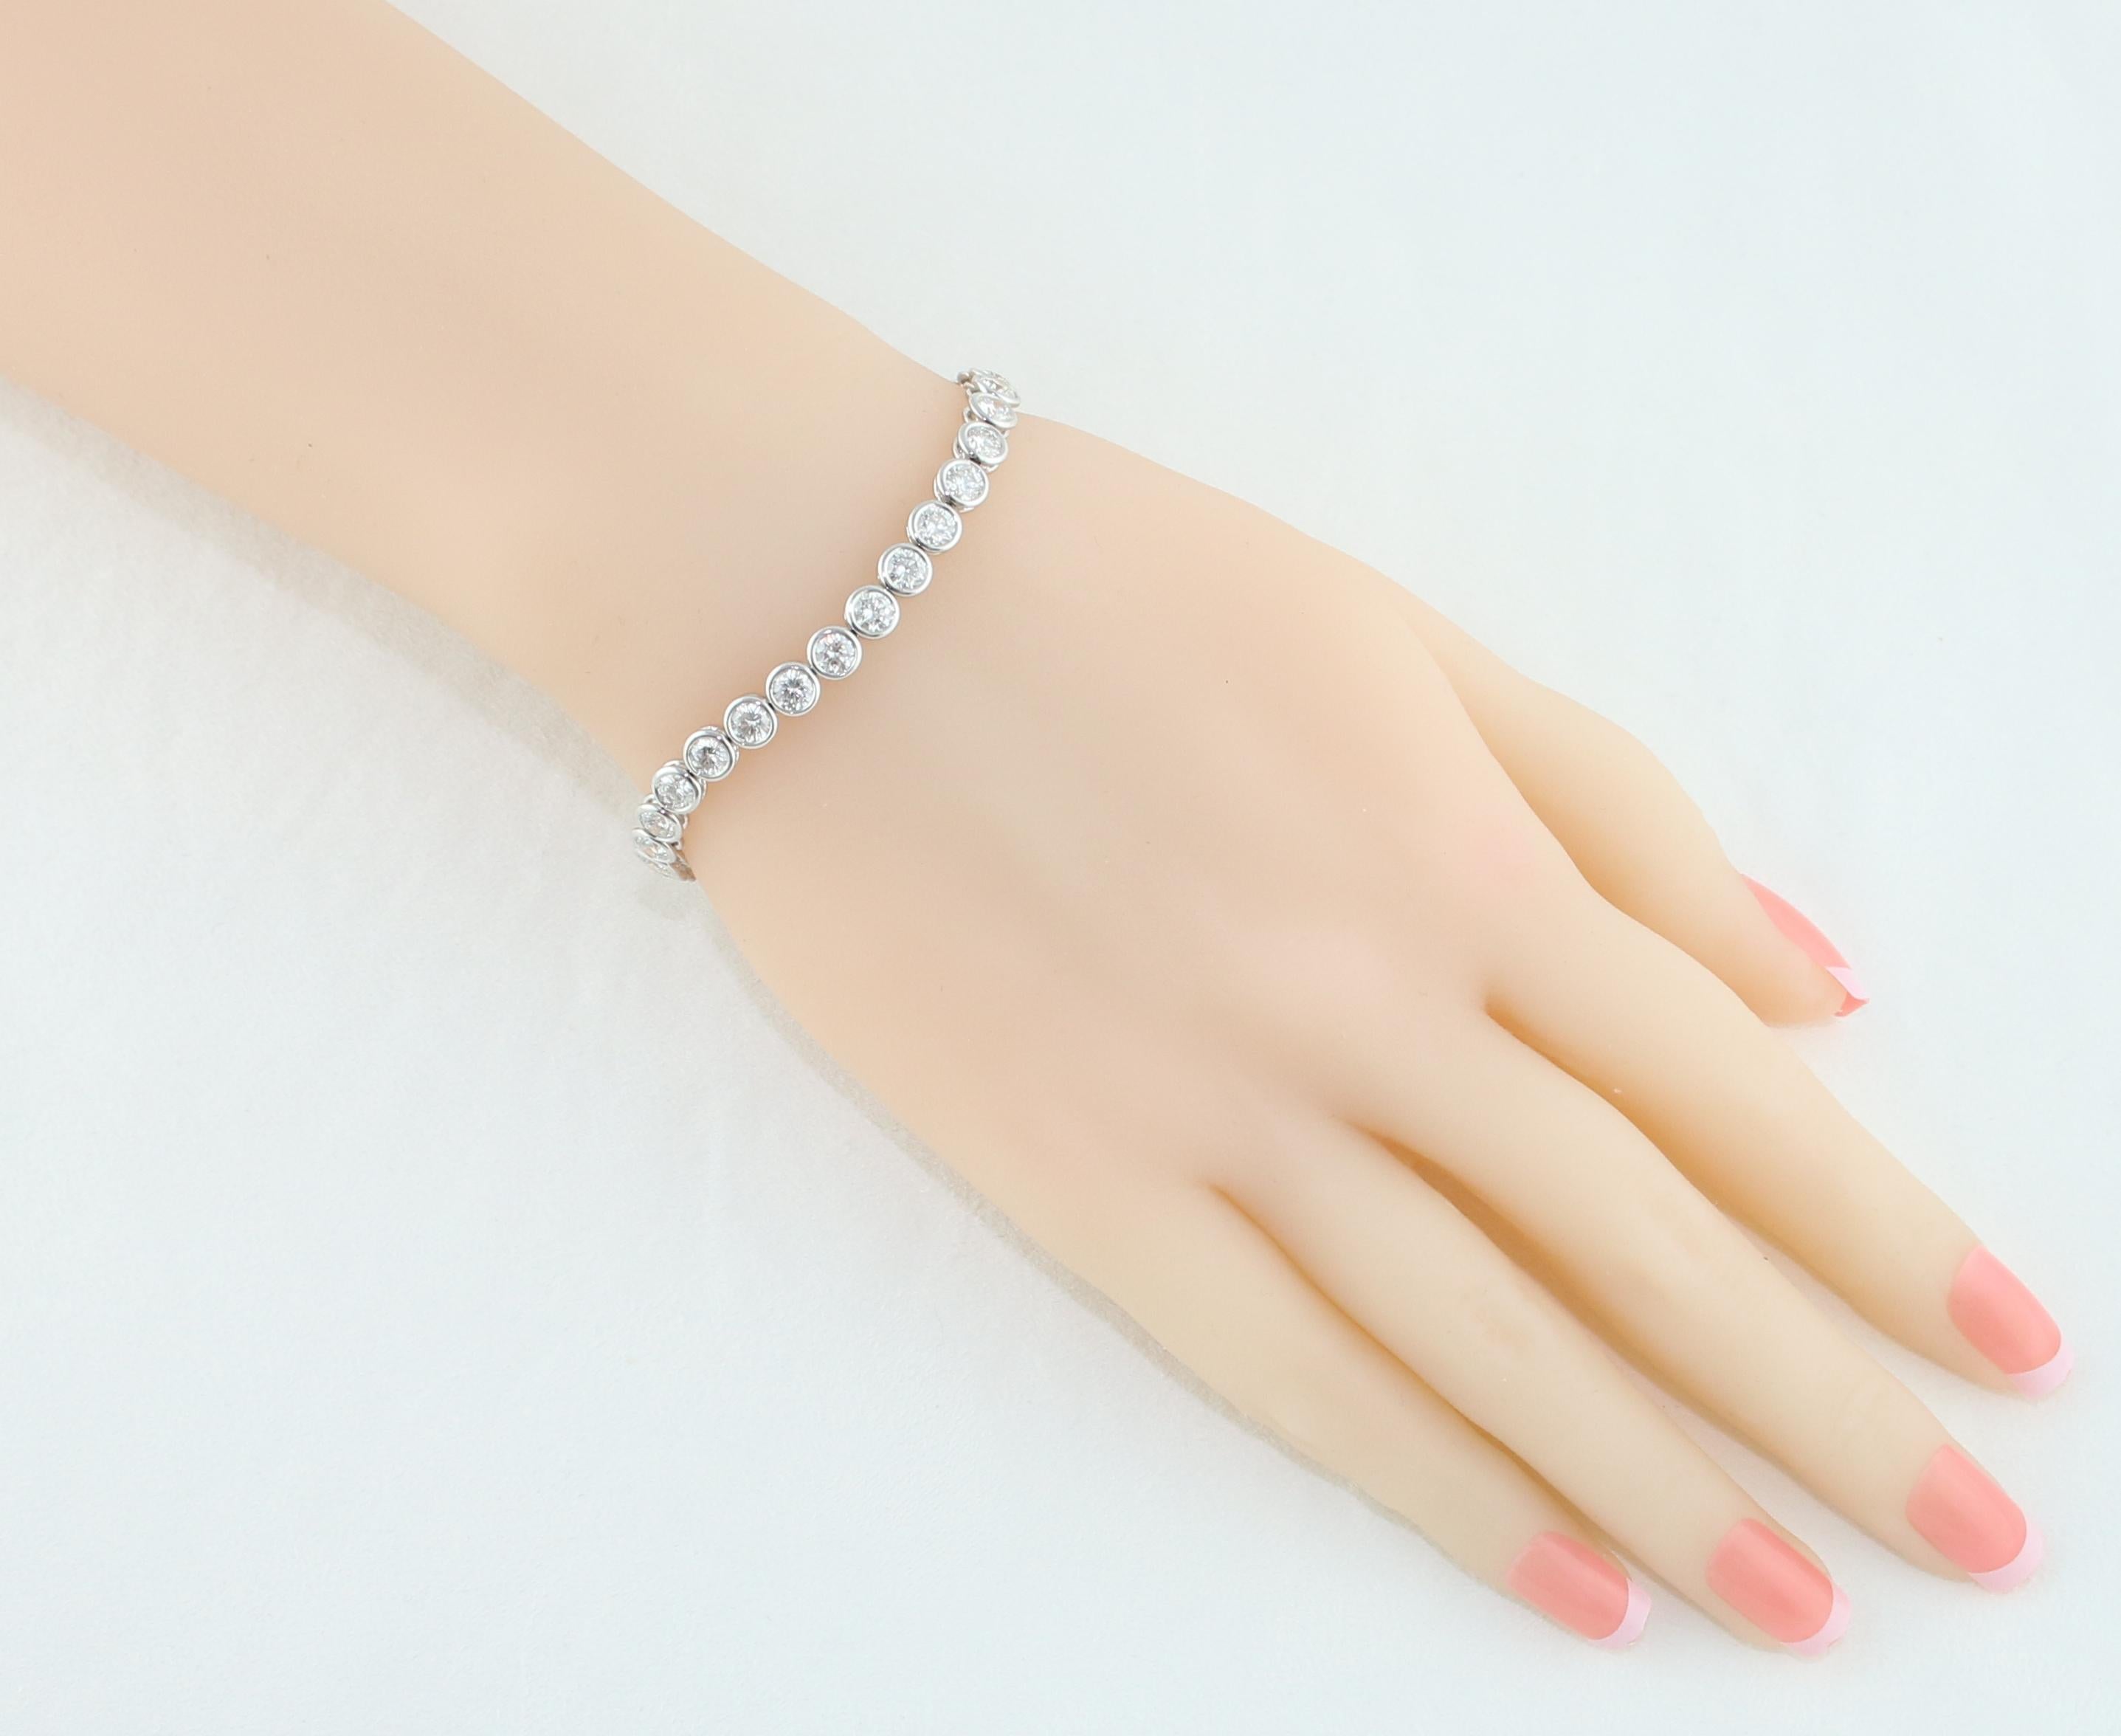 Beautiful & Classic Bezel Tennis Bracelet.
The bracelet is 18K White Gold.
There are 10.00 Carats in Diamonds F/G VS.
There are 34 stones, each stone is 0.30 Carat.
The bracelet is 7.25